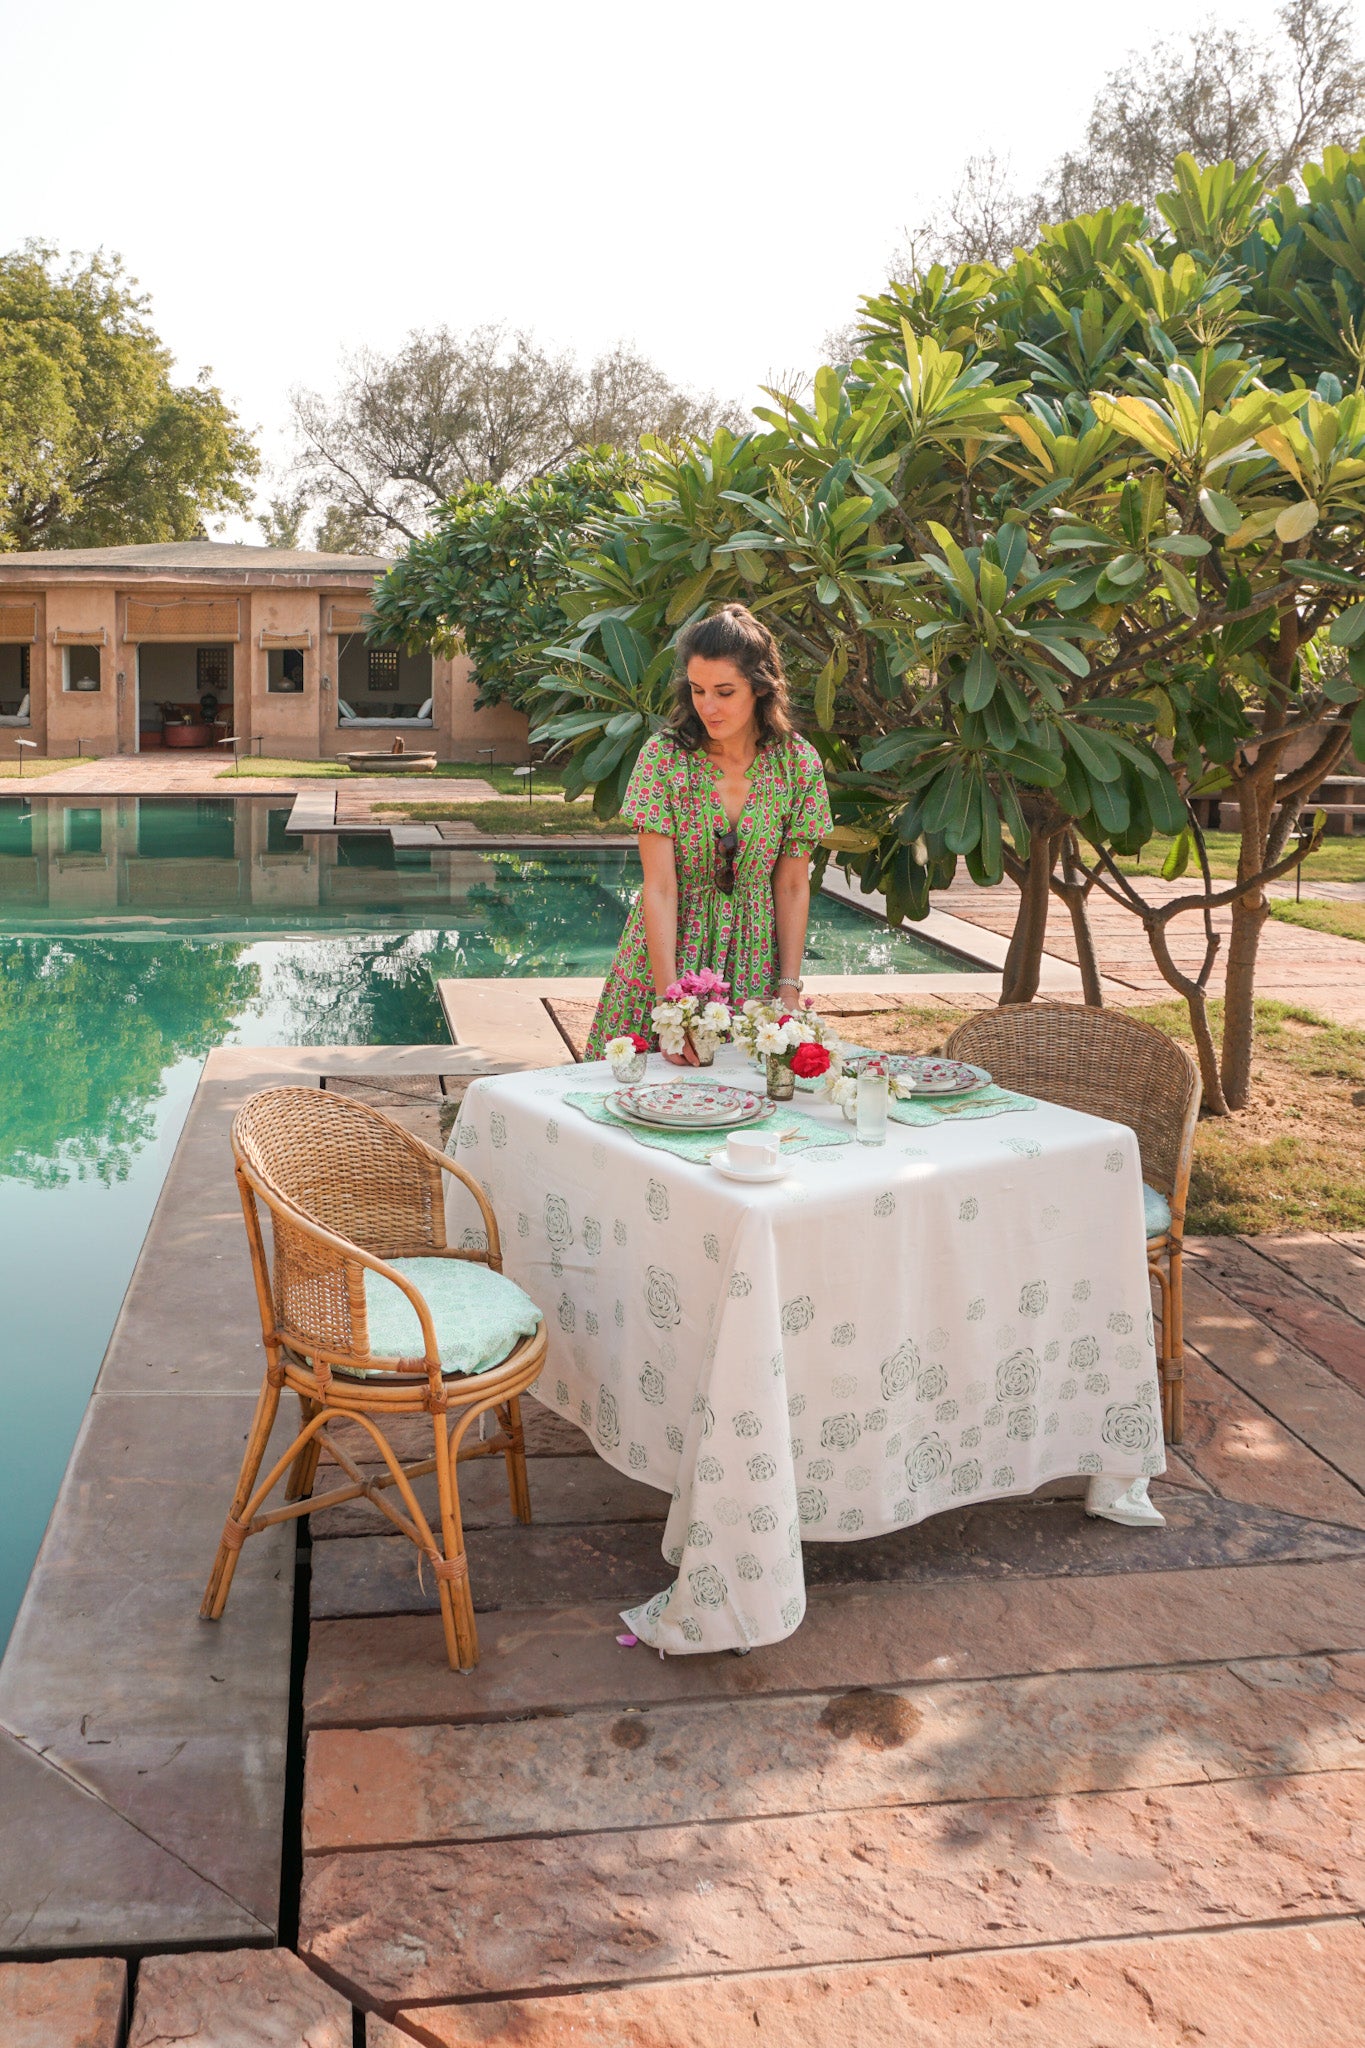 Deeppura Garh swimming pool with table laid for breakfast next to it